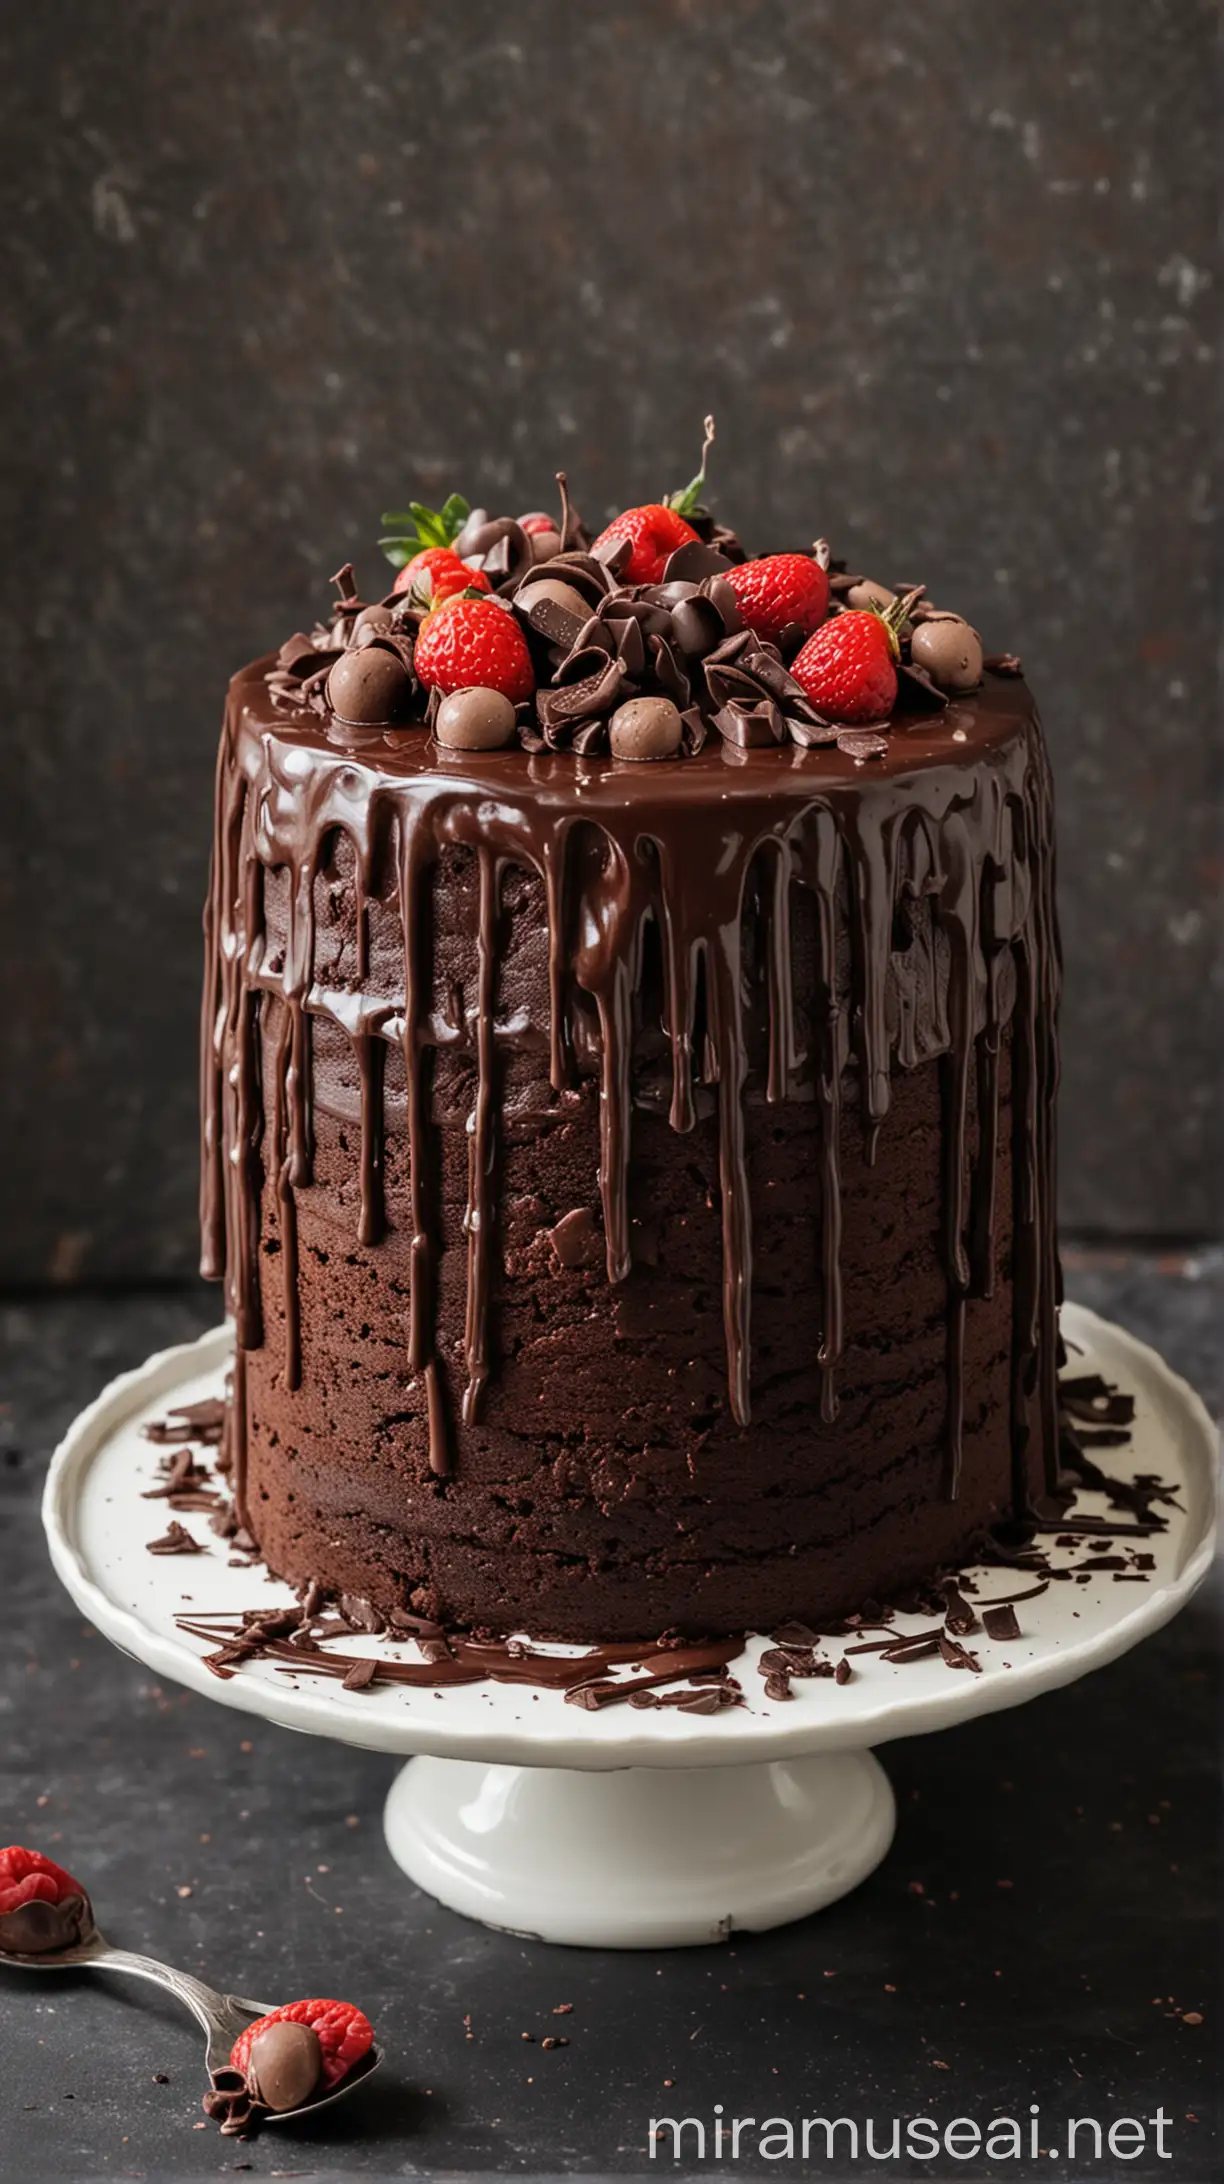 Decadent Chocolate Cake with Rich Ganache Topping